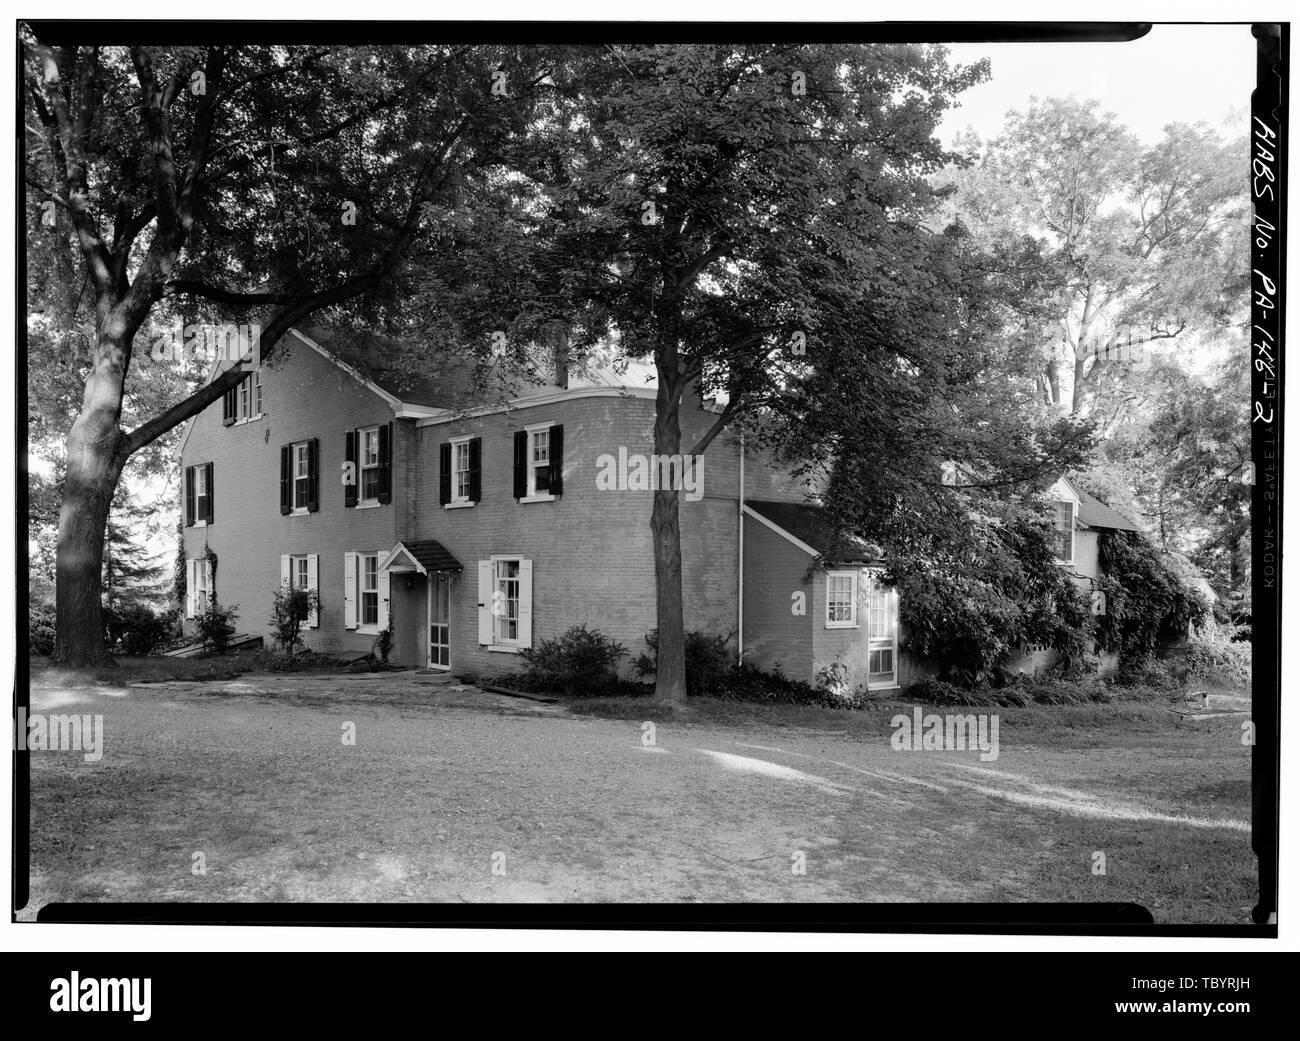 A nord e a ovest Morriseianna, Statale Route 41 (London Grove Township), Chatham, Chester County, PA Foto Stock